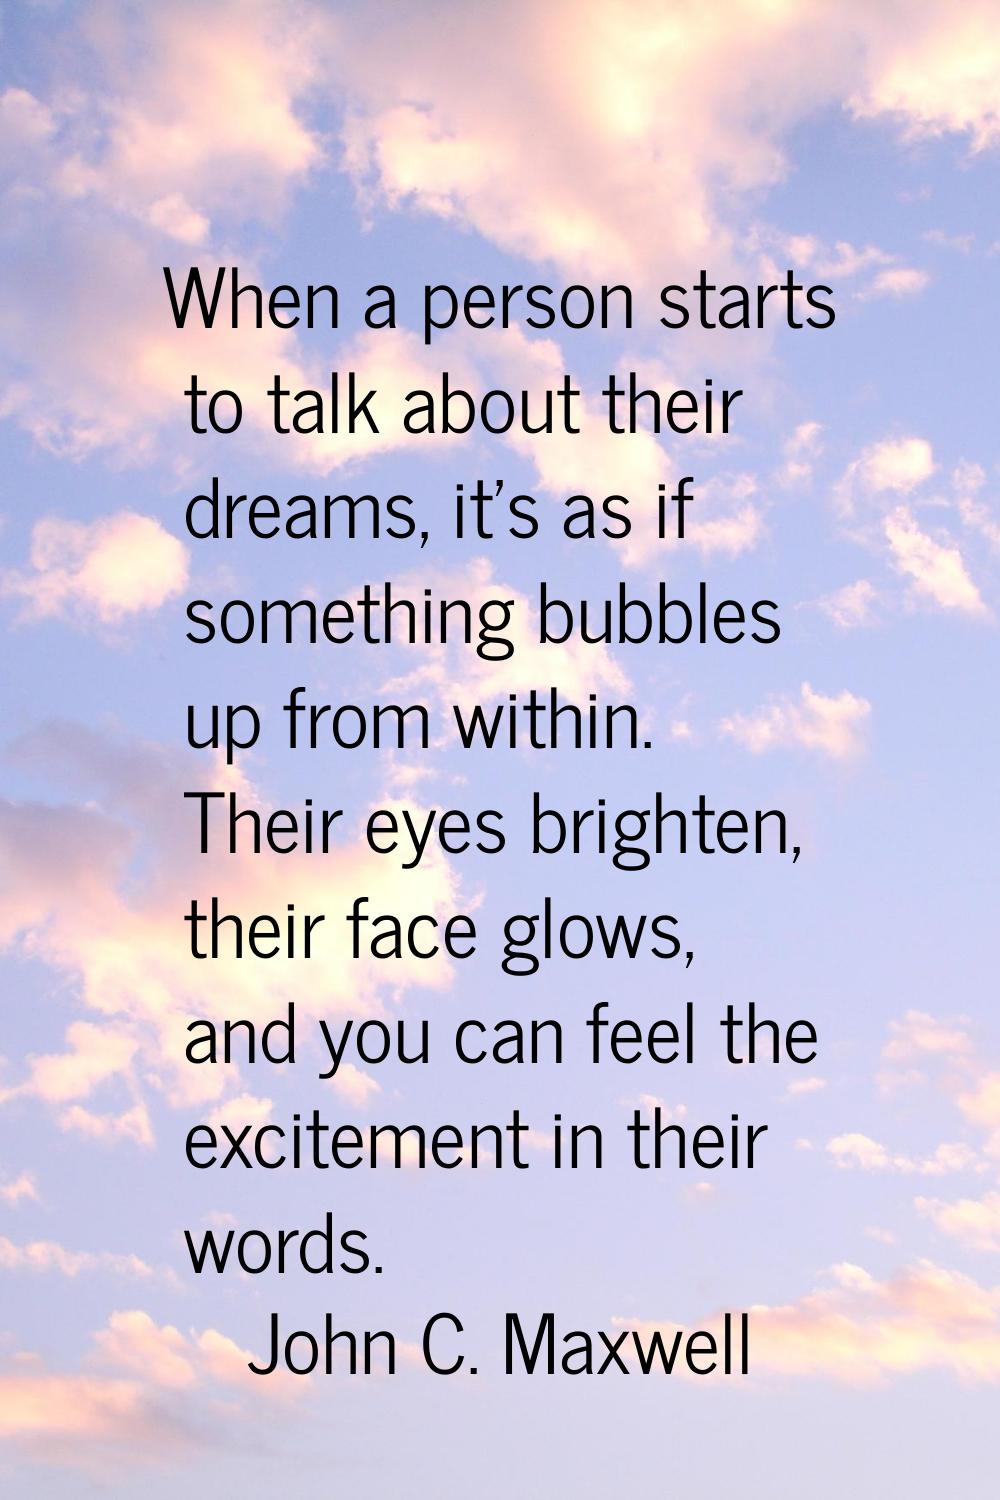 When a person starts to talk about their dreams, it's as if something bubbles up from within. Their